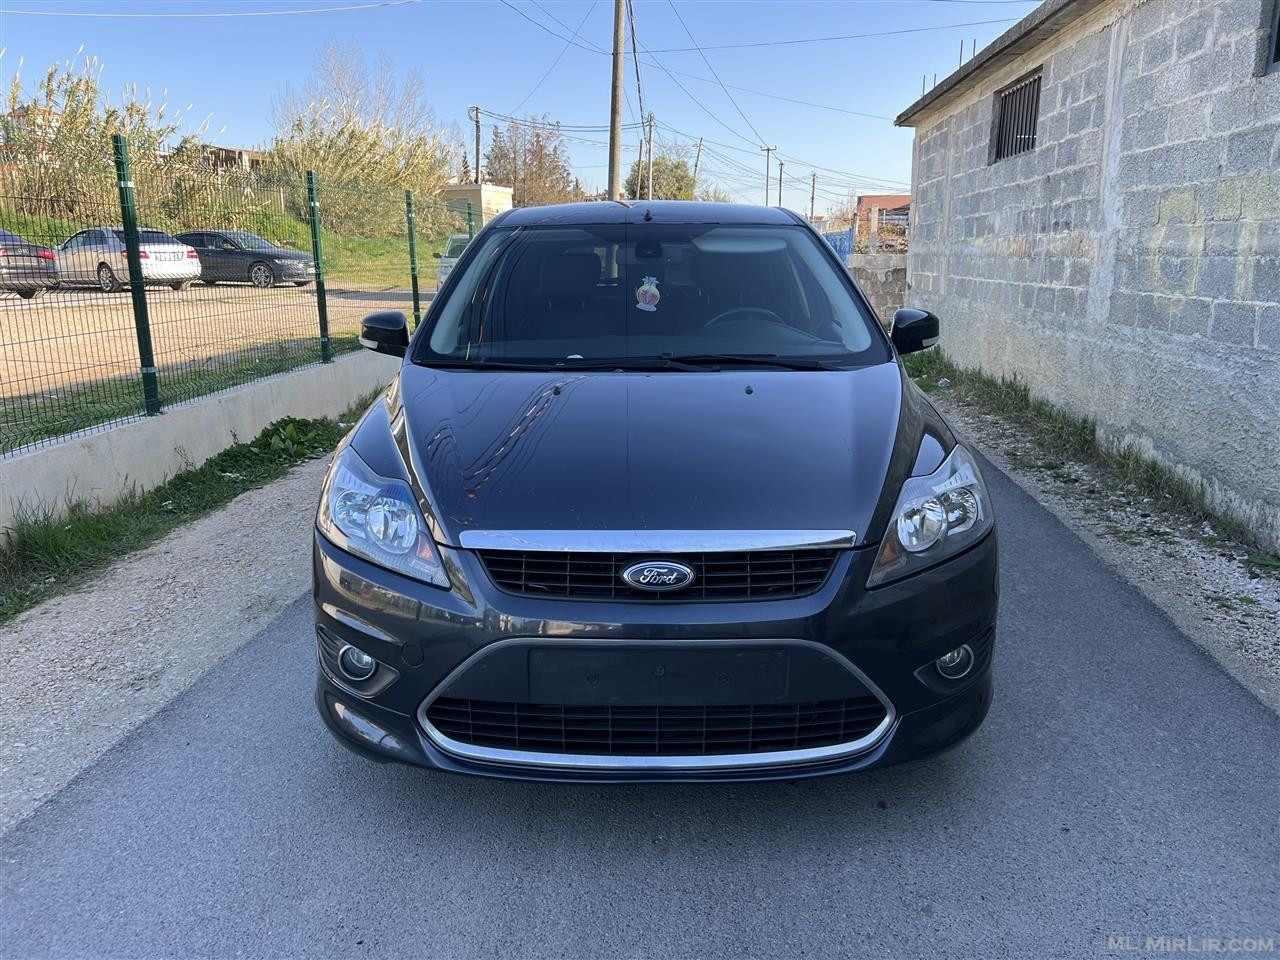 Ford Focus 1.6 nafte